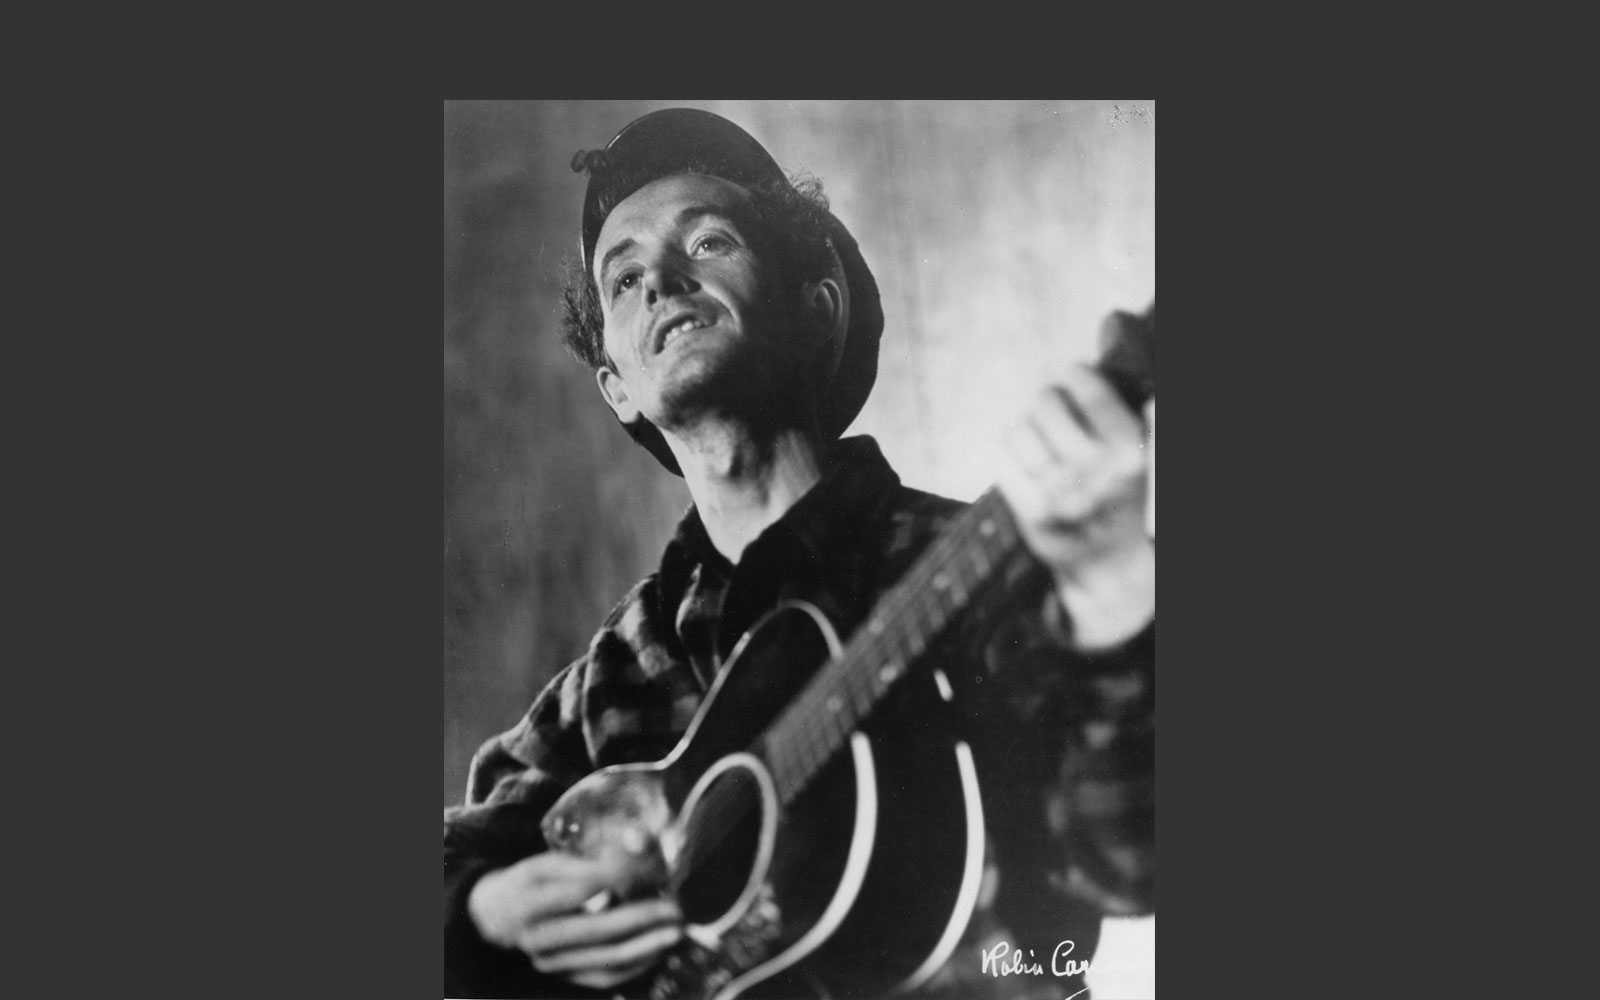 Black and white photo of Woody Guthrie playing guitar wearing cap and checked shirt.